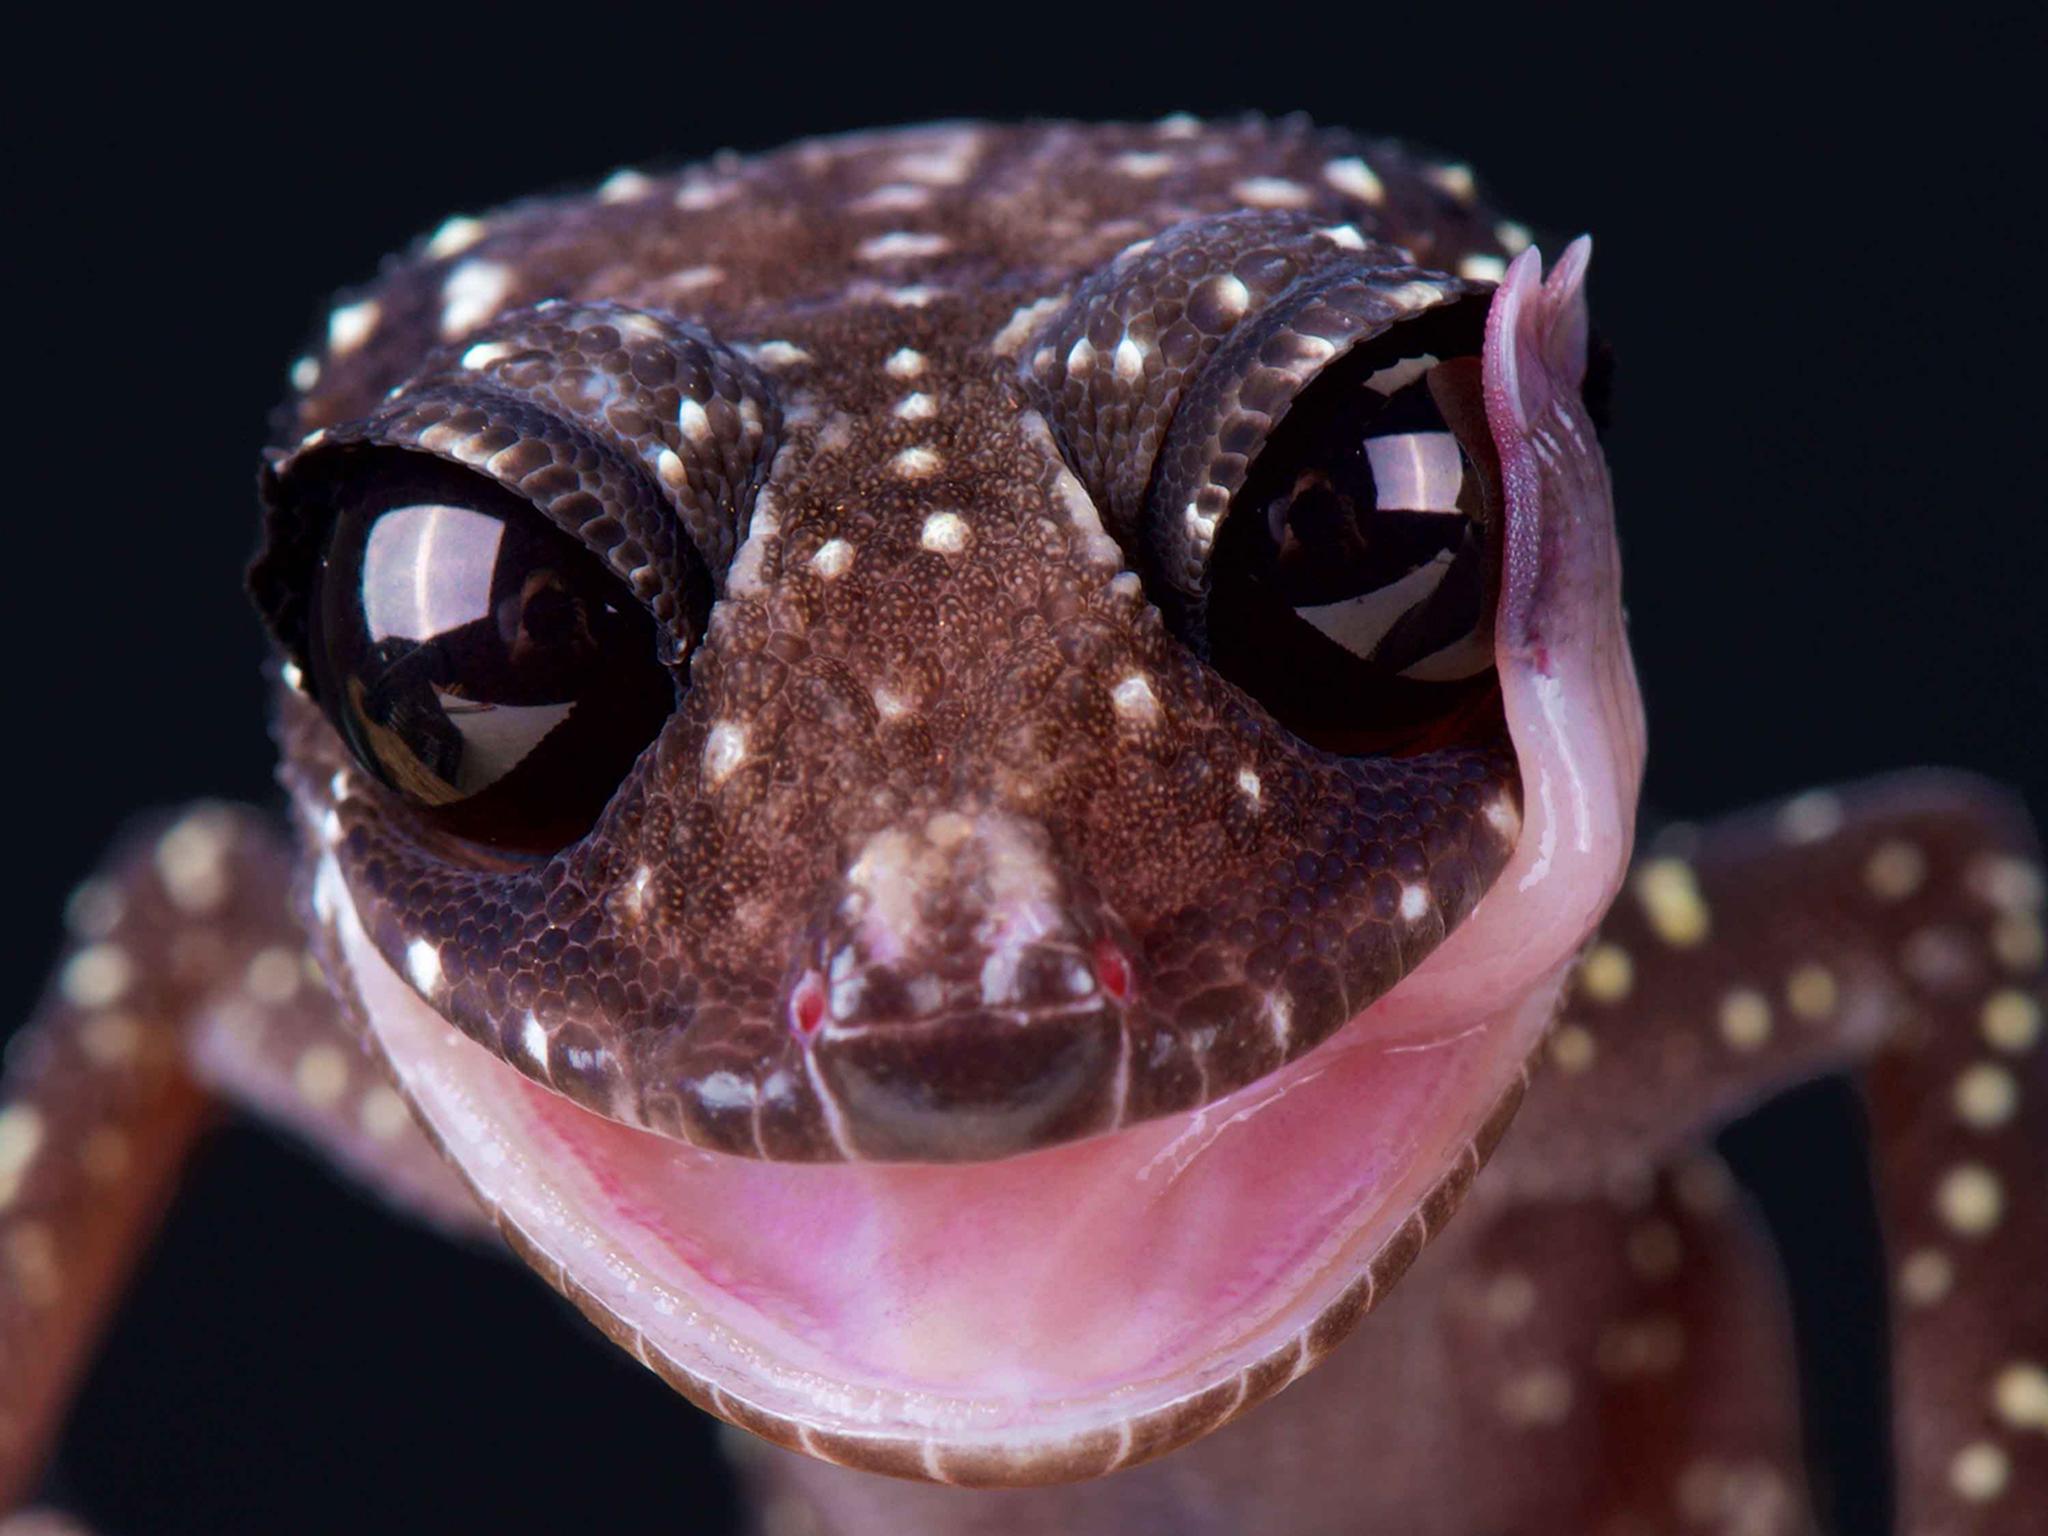 Rare and strange cold-blooded creatures captured in striking